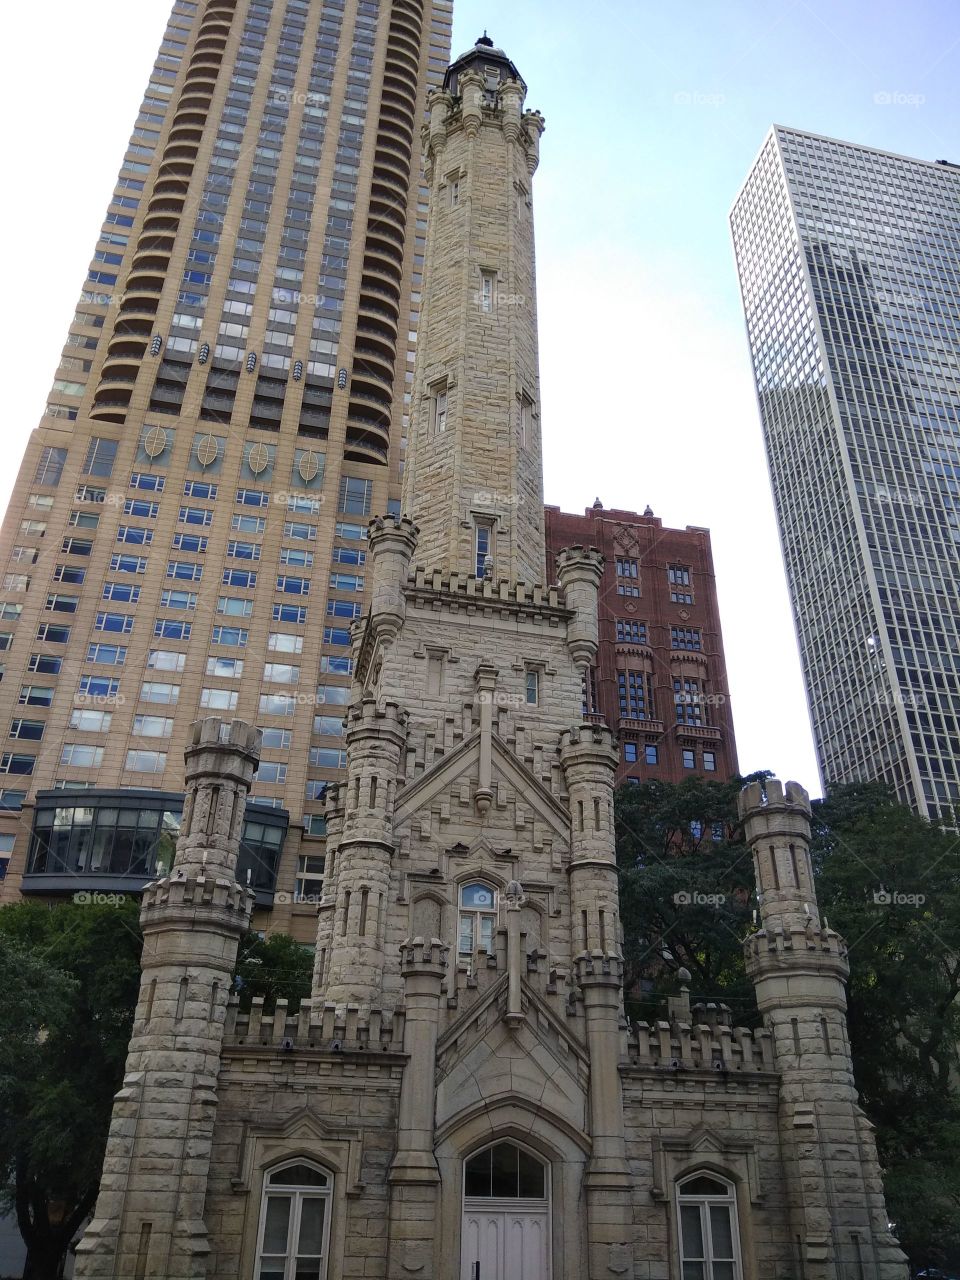 Water tower_survived after great chicago fire of 1971